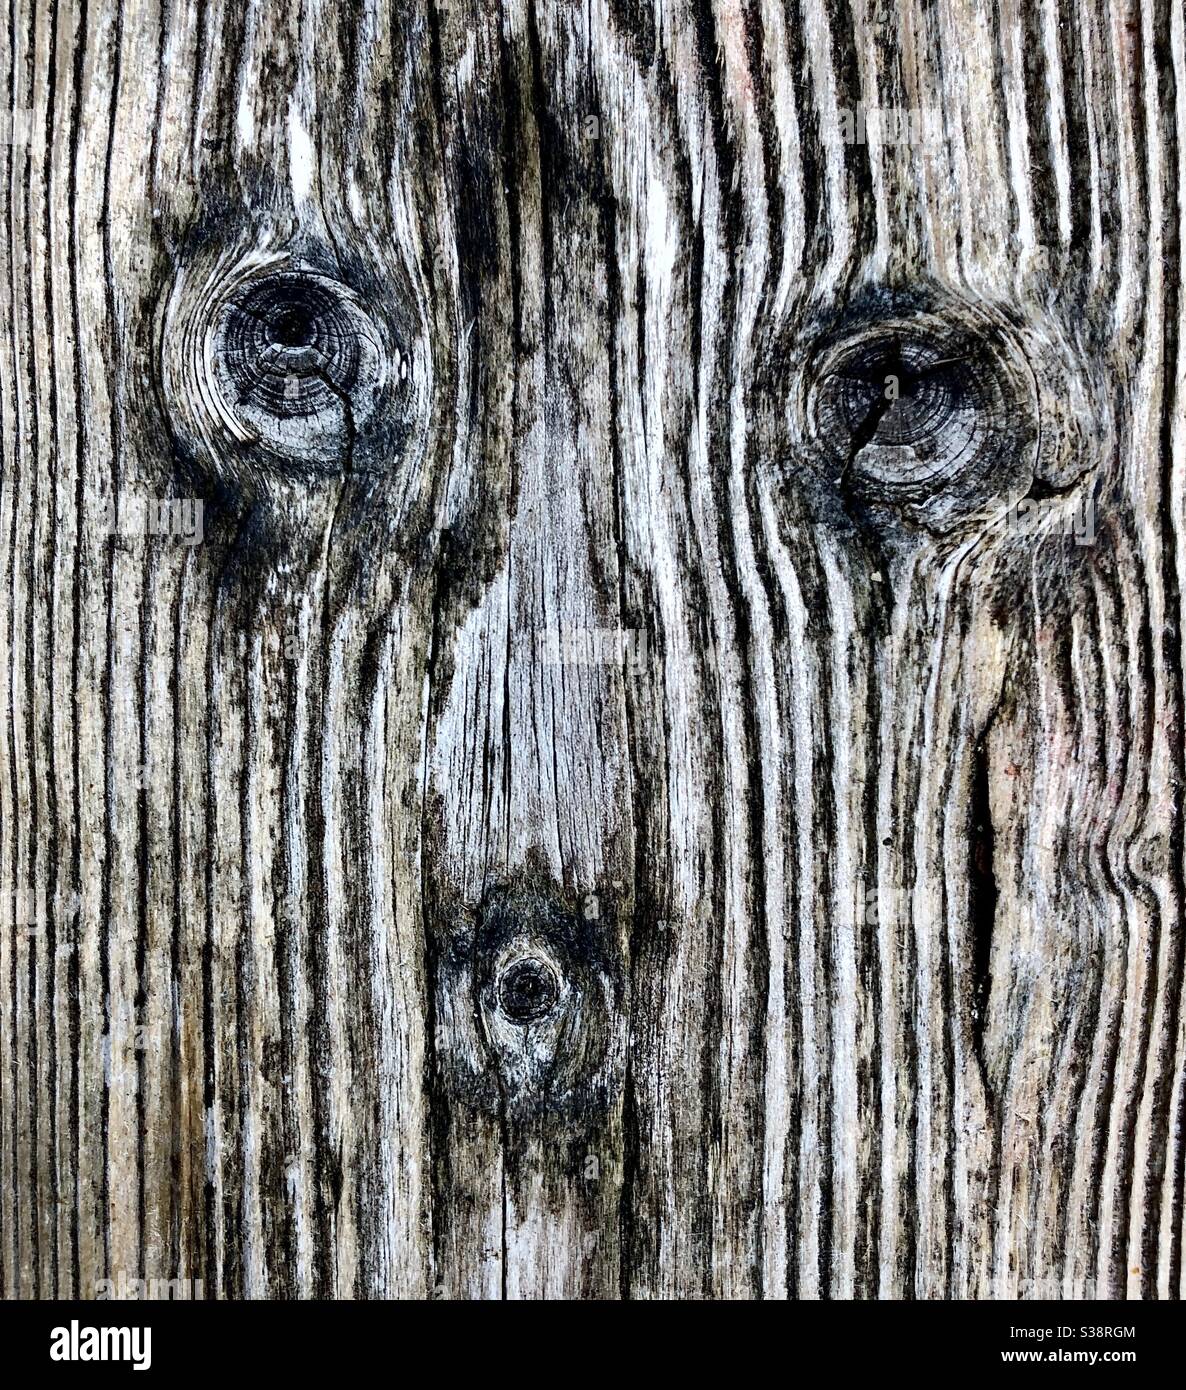 Weathered wood grain and knots resembling a monkey’s face. Stock Photo